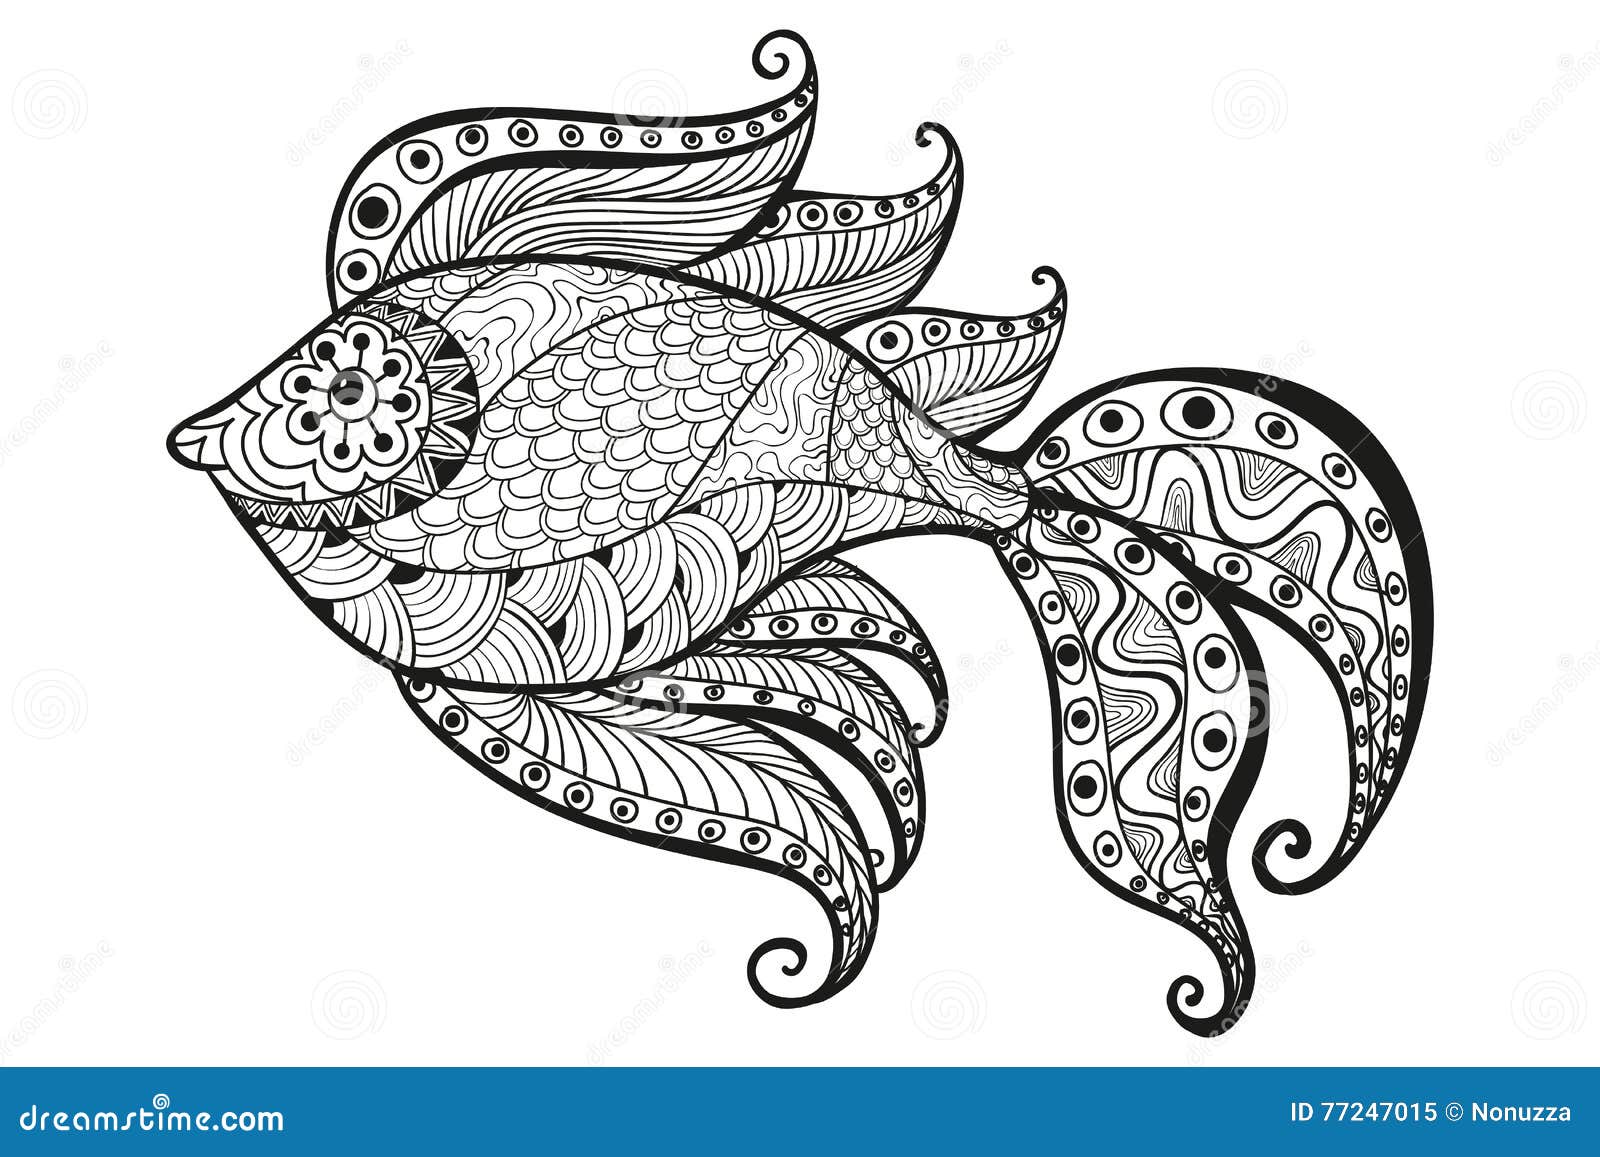 Coloring book adult stock vector. Illustration of design - 77247015